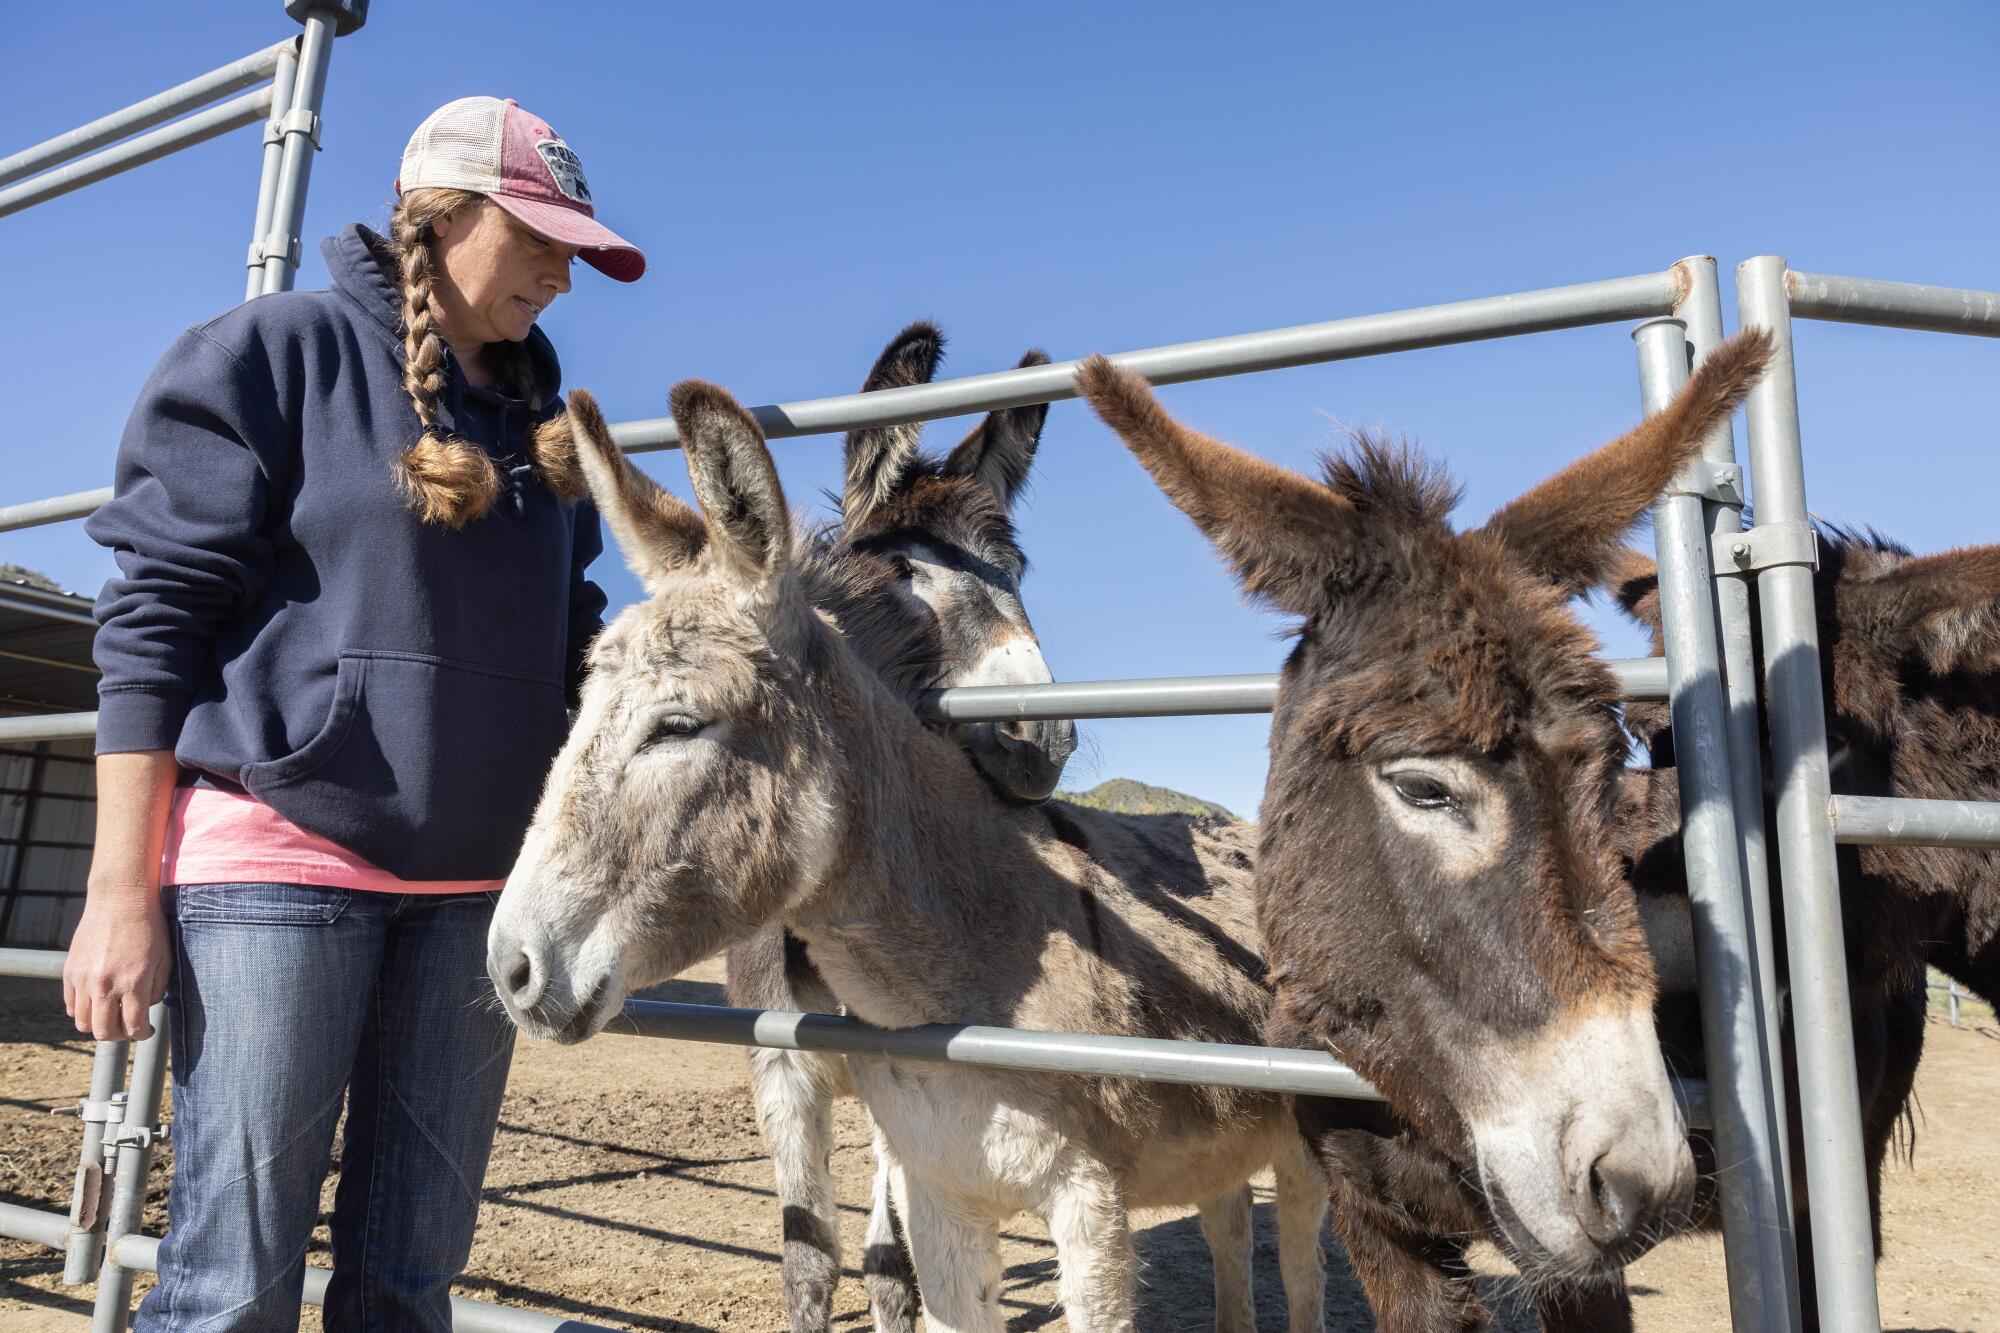 A woman with braided hair, in a pink-and-white cap, dark hoodie and jeans, stands near two fenced donkeys 